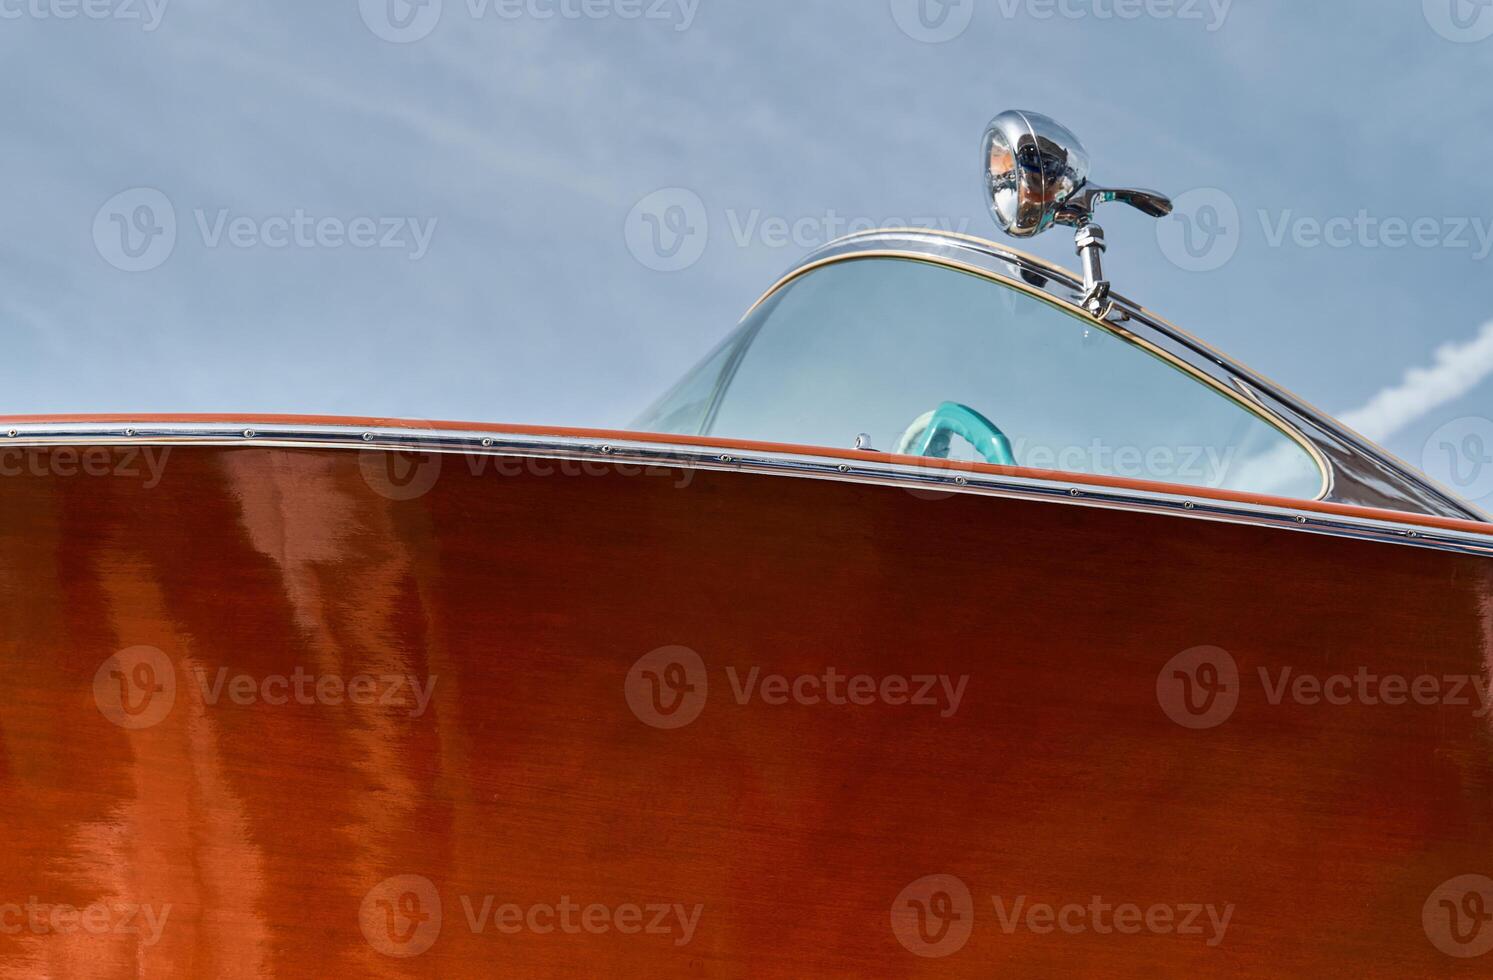 the wooden side of the luxury motor boat in port of Hercules in Monaco, sunny glare of the sun, elegance boat, glossy surfaces shine in sunny weather photo